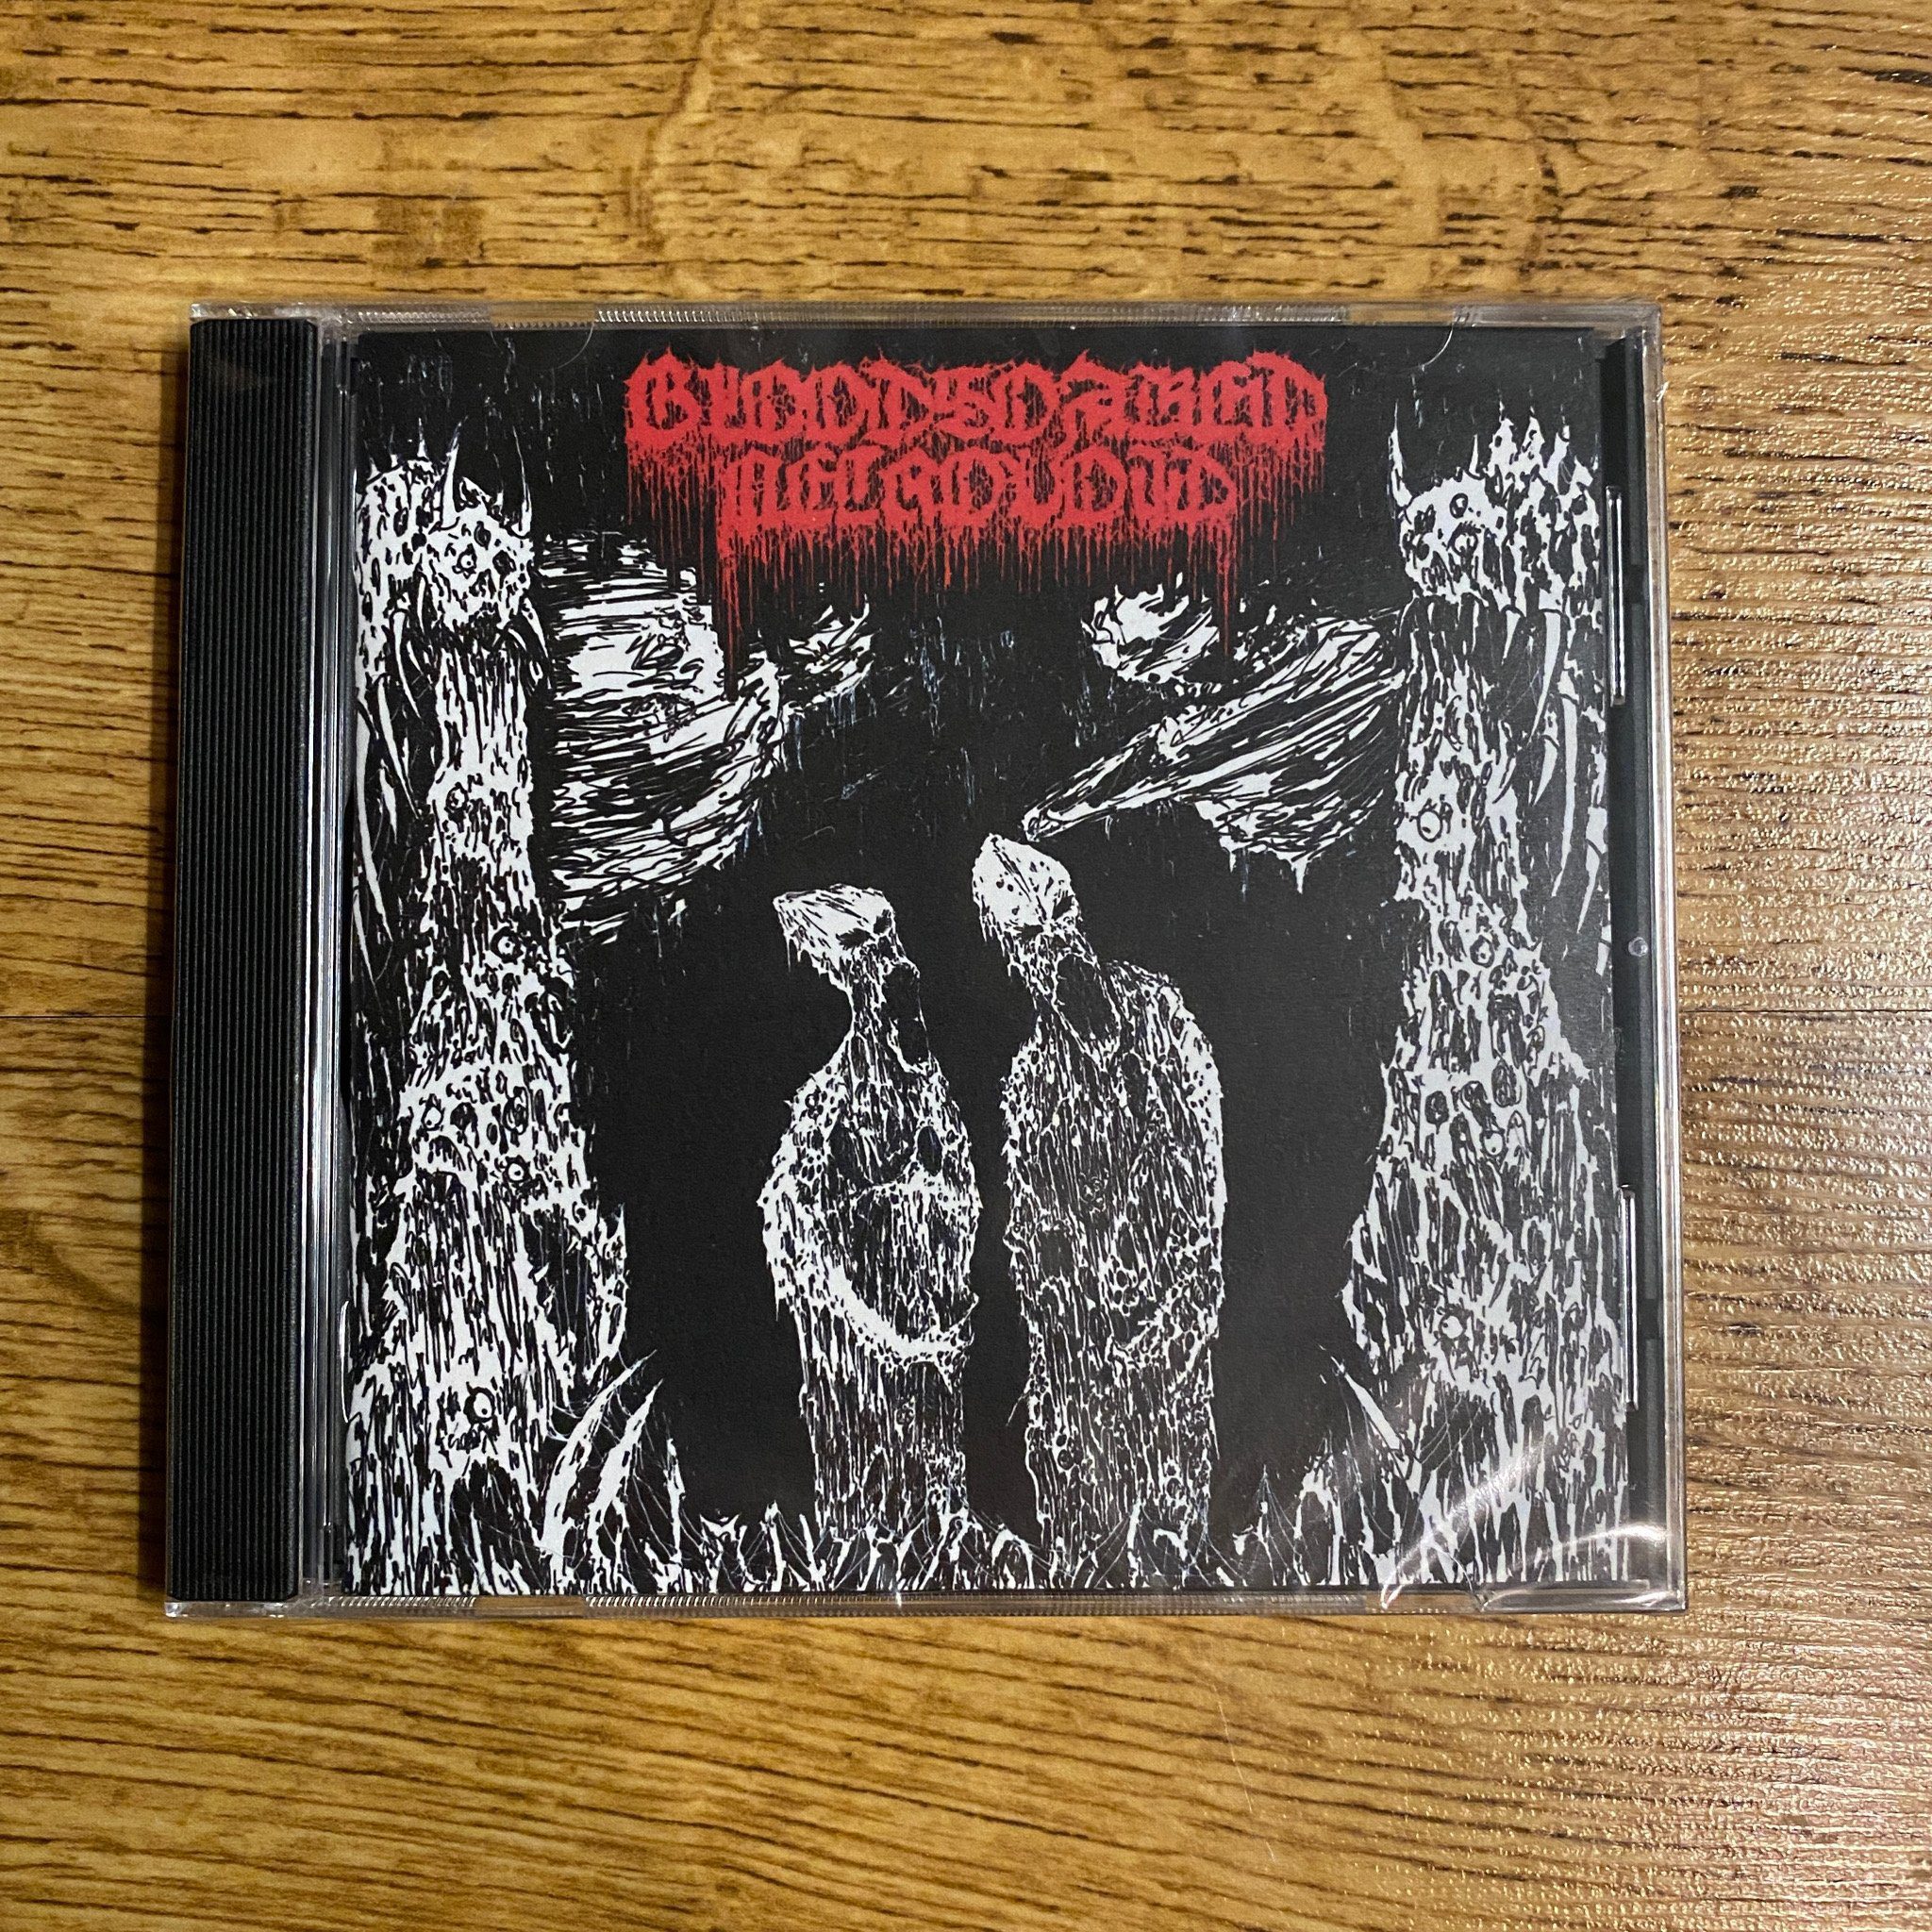 Photo of the Bloodsoaked Necrovoid - "The Apocryphal Paths of the Ancient 8th Vitriolic Transcendence" CD